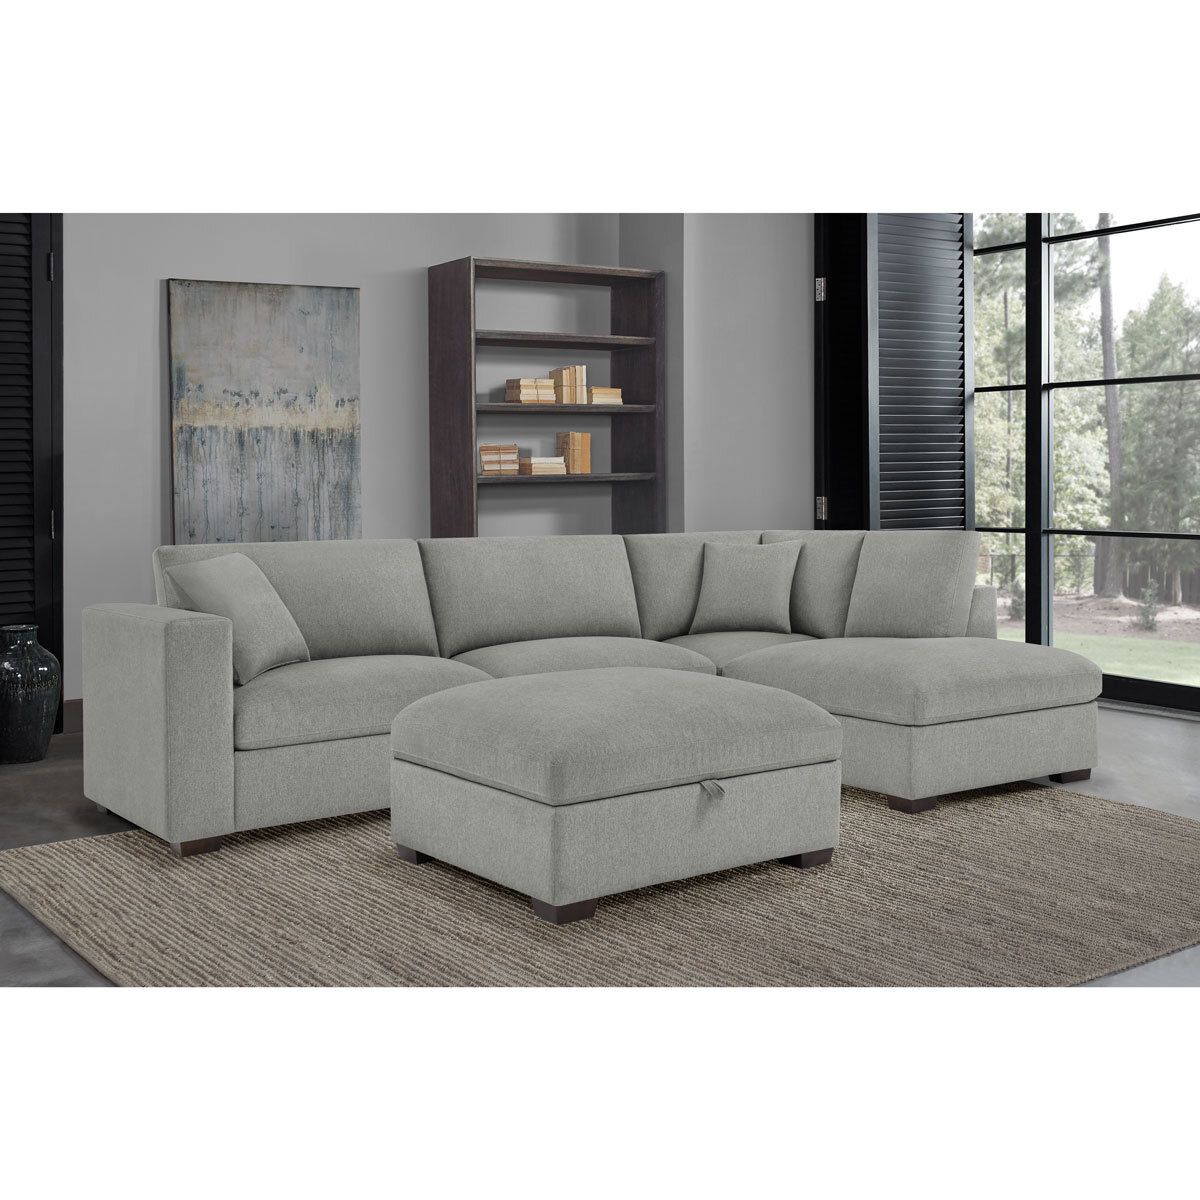 Thomasville Holmes Grey Fabric 3 Piece Sectional Sofa With Storage Ottoman For Sofas With Storage Ottoman (View 13 of 15)